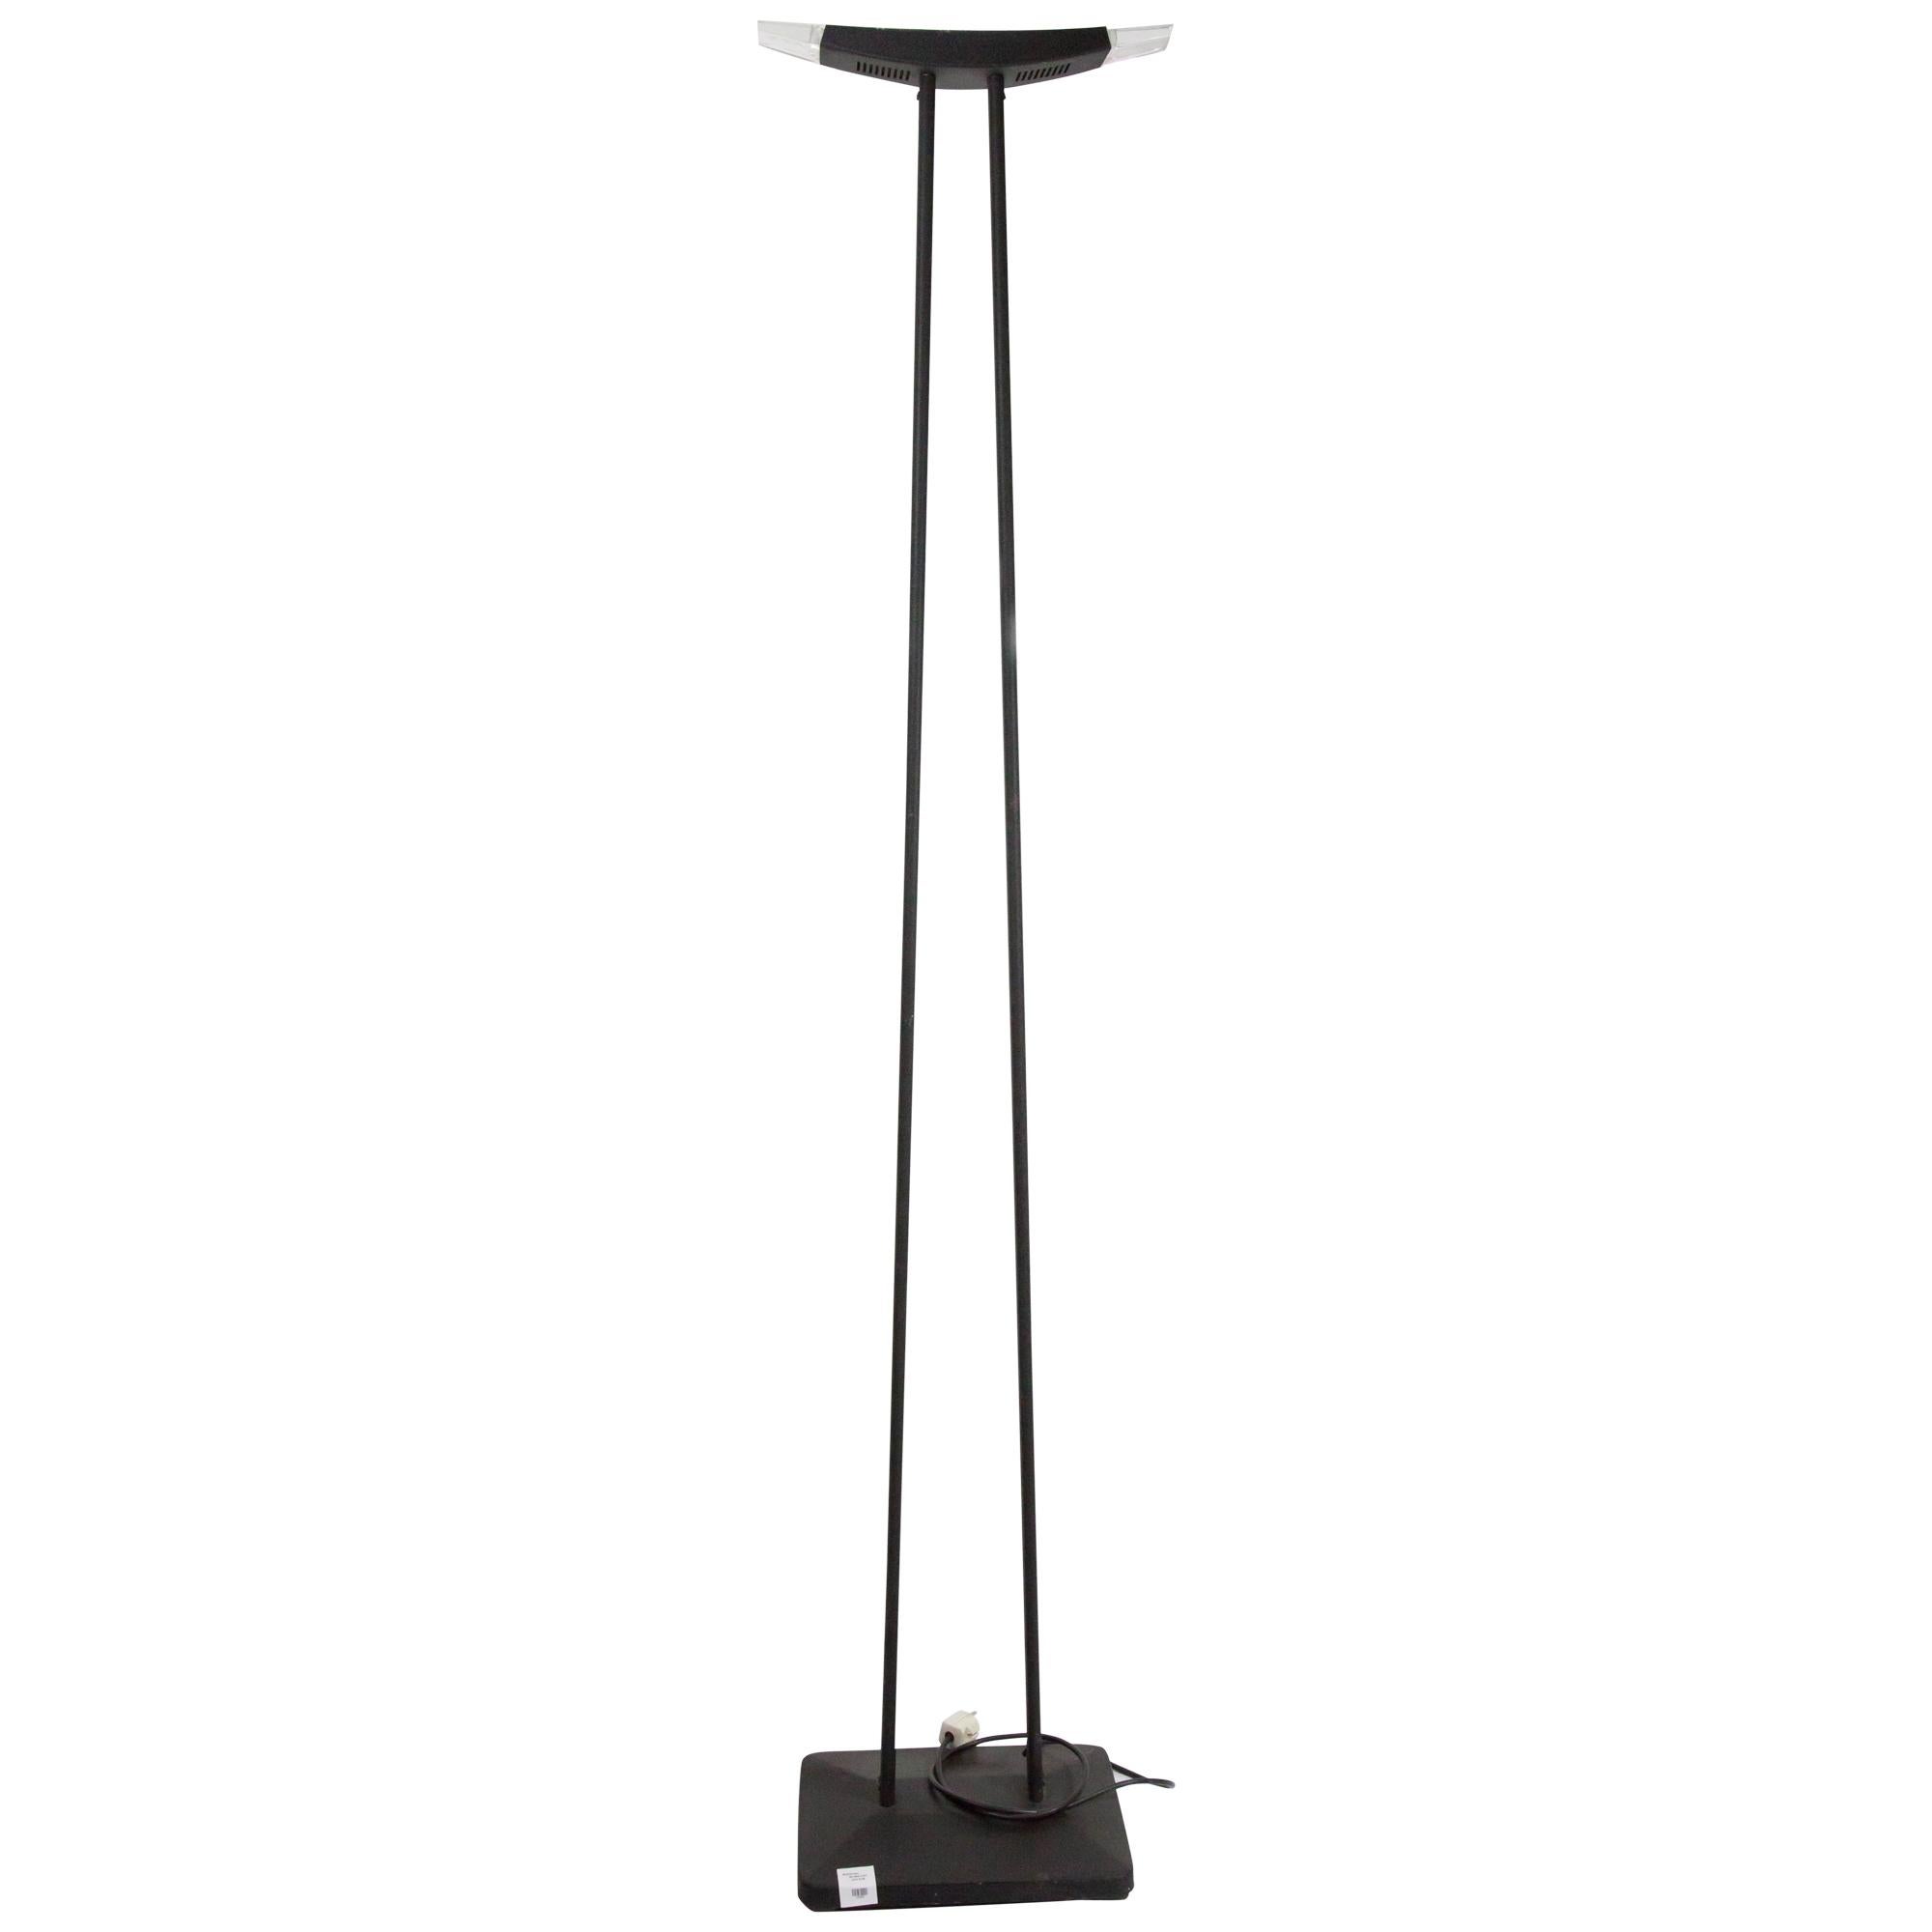 Postmodern Floor Lamp with Rugged Charcoal Paint and Plexiglass, 1980s